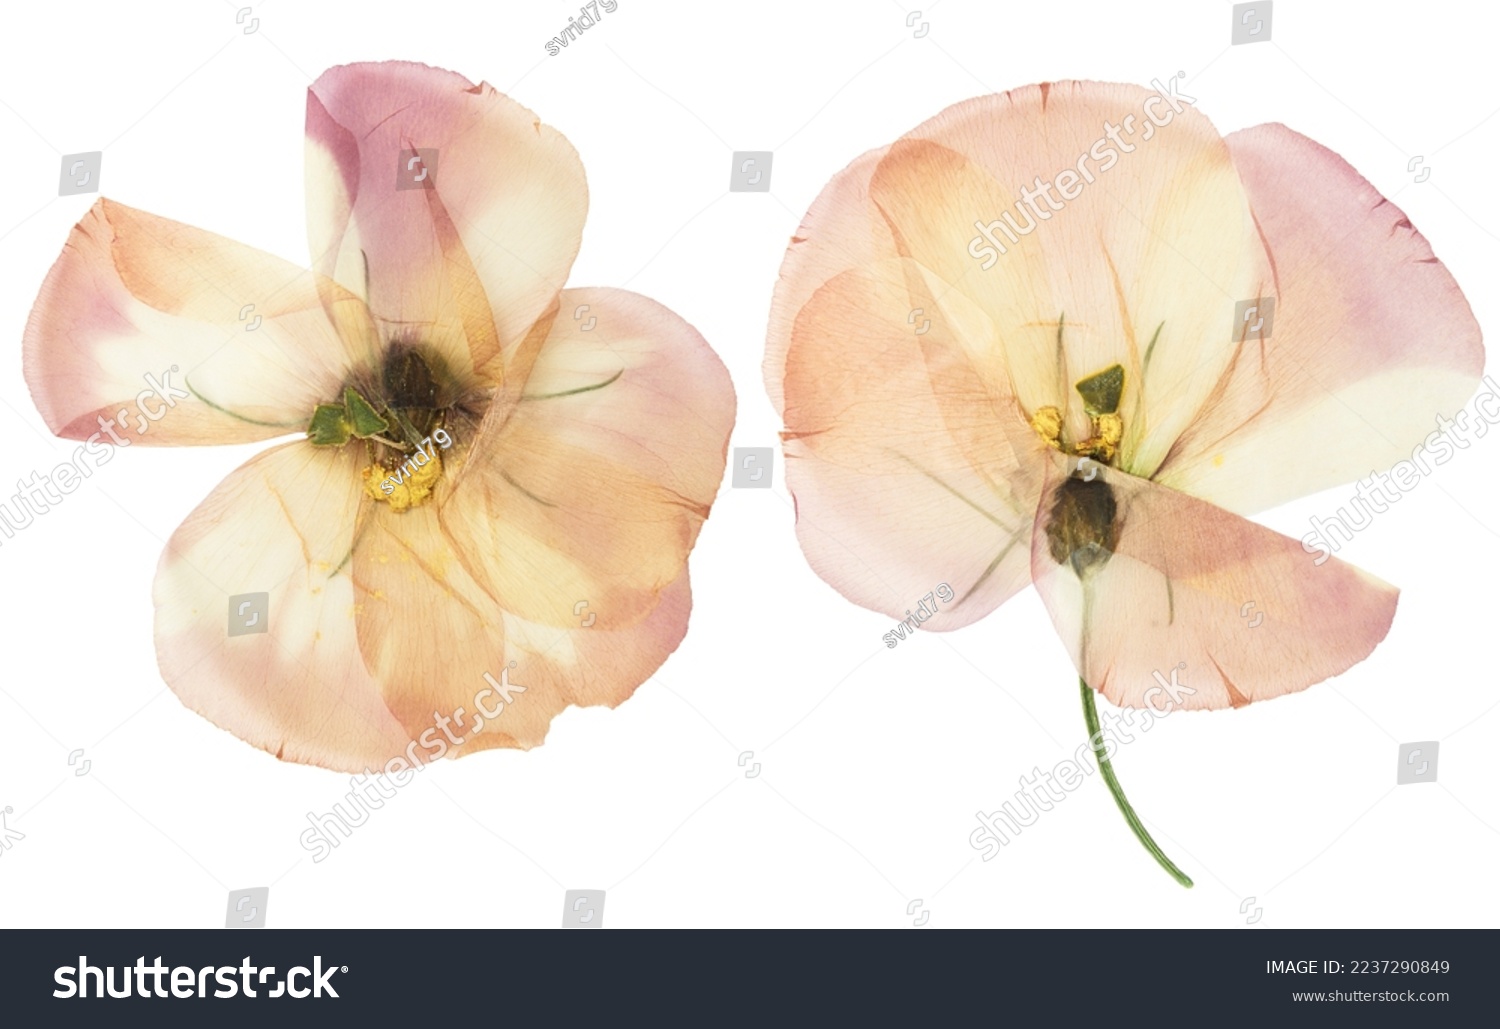 Pressed and dried flower Eustoma (Lisianthus). Isolated on white background. #2237290849